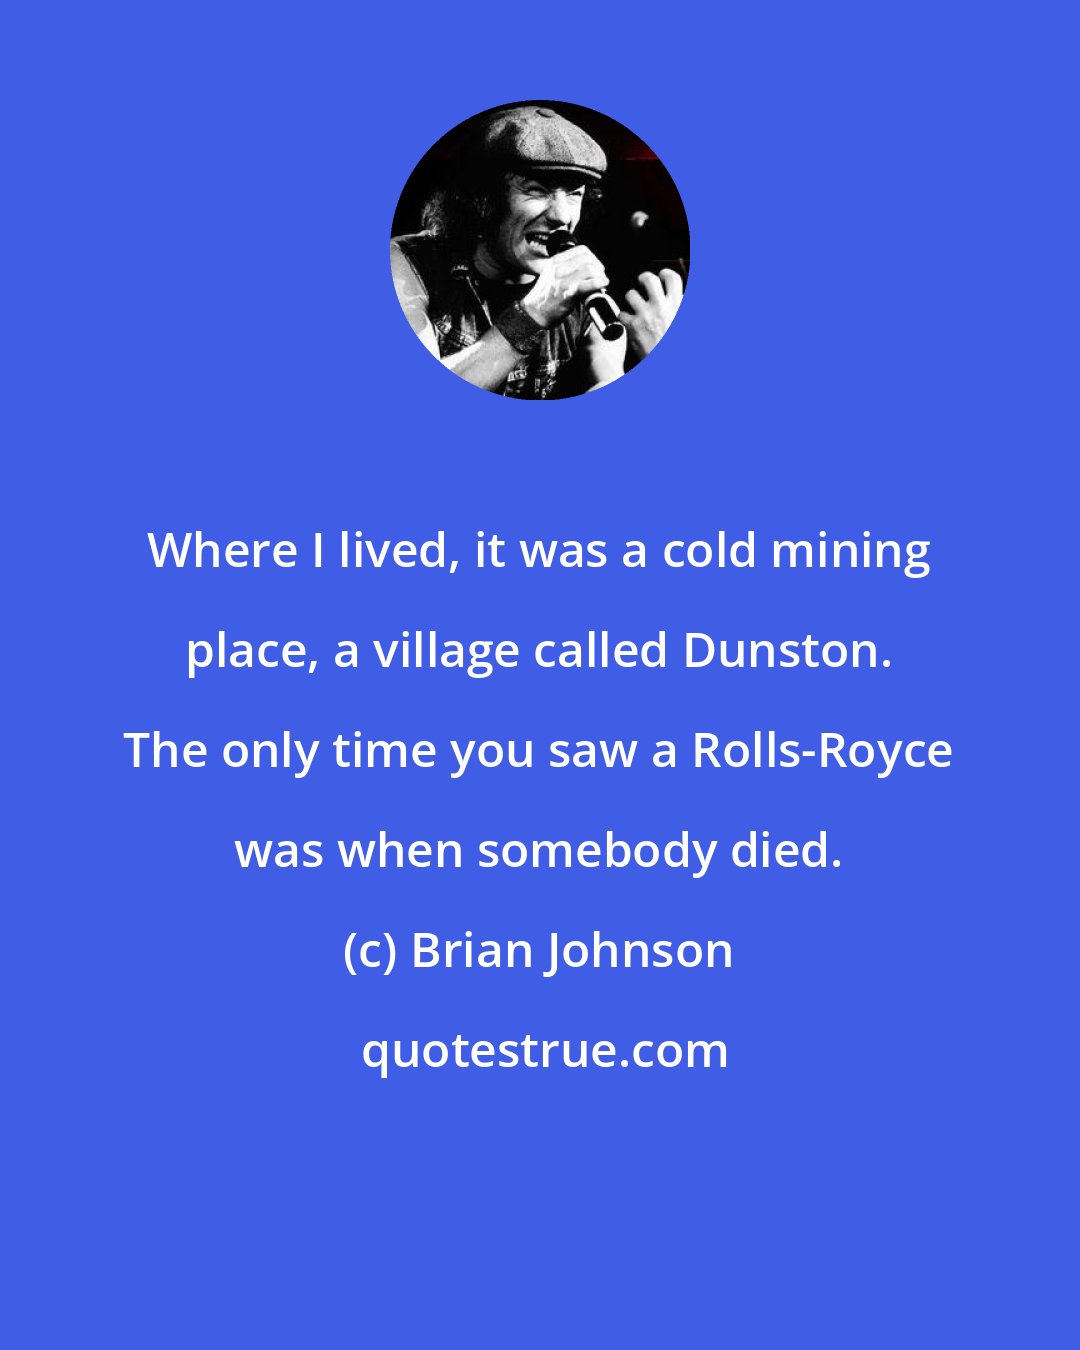 Brian Johnson: Where I lived, it was a cold mining place, a village called Dunston. The only time you saw a Rolls-Royce was when somebody died.